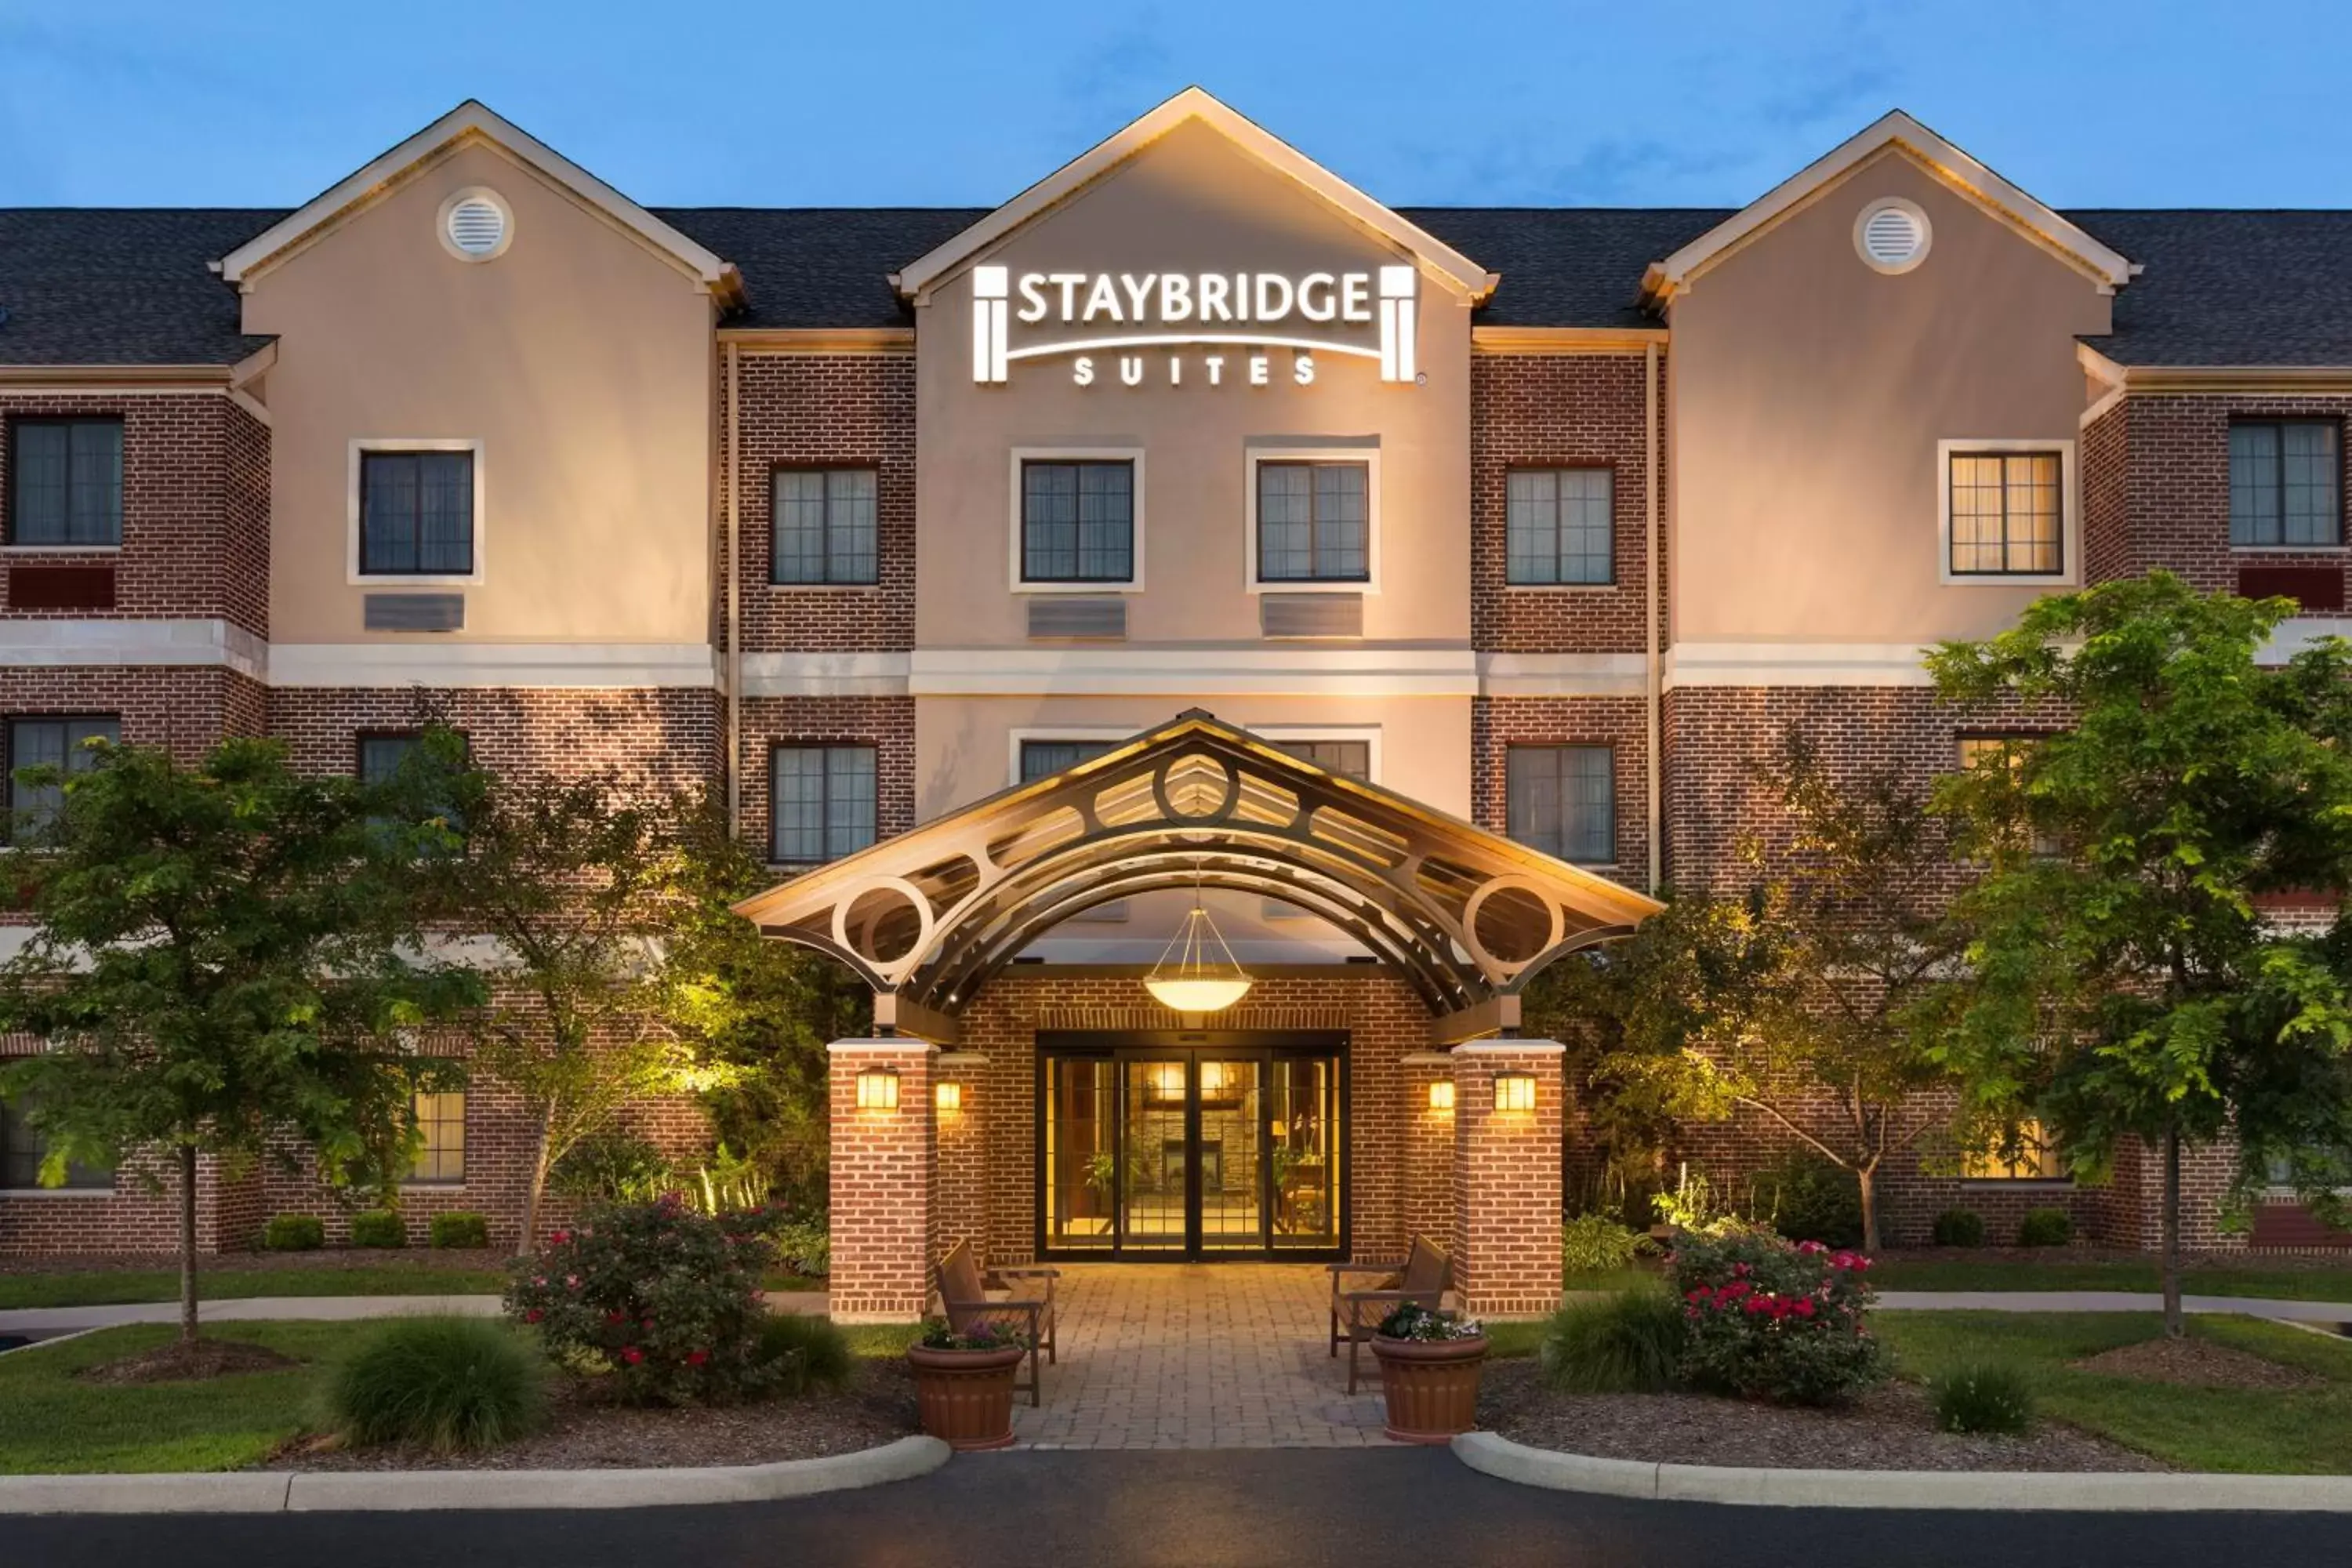 Property building in Staybridge Suites Akron-Stow-Cuyahoga Falls, an IHG Hotel